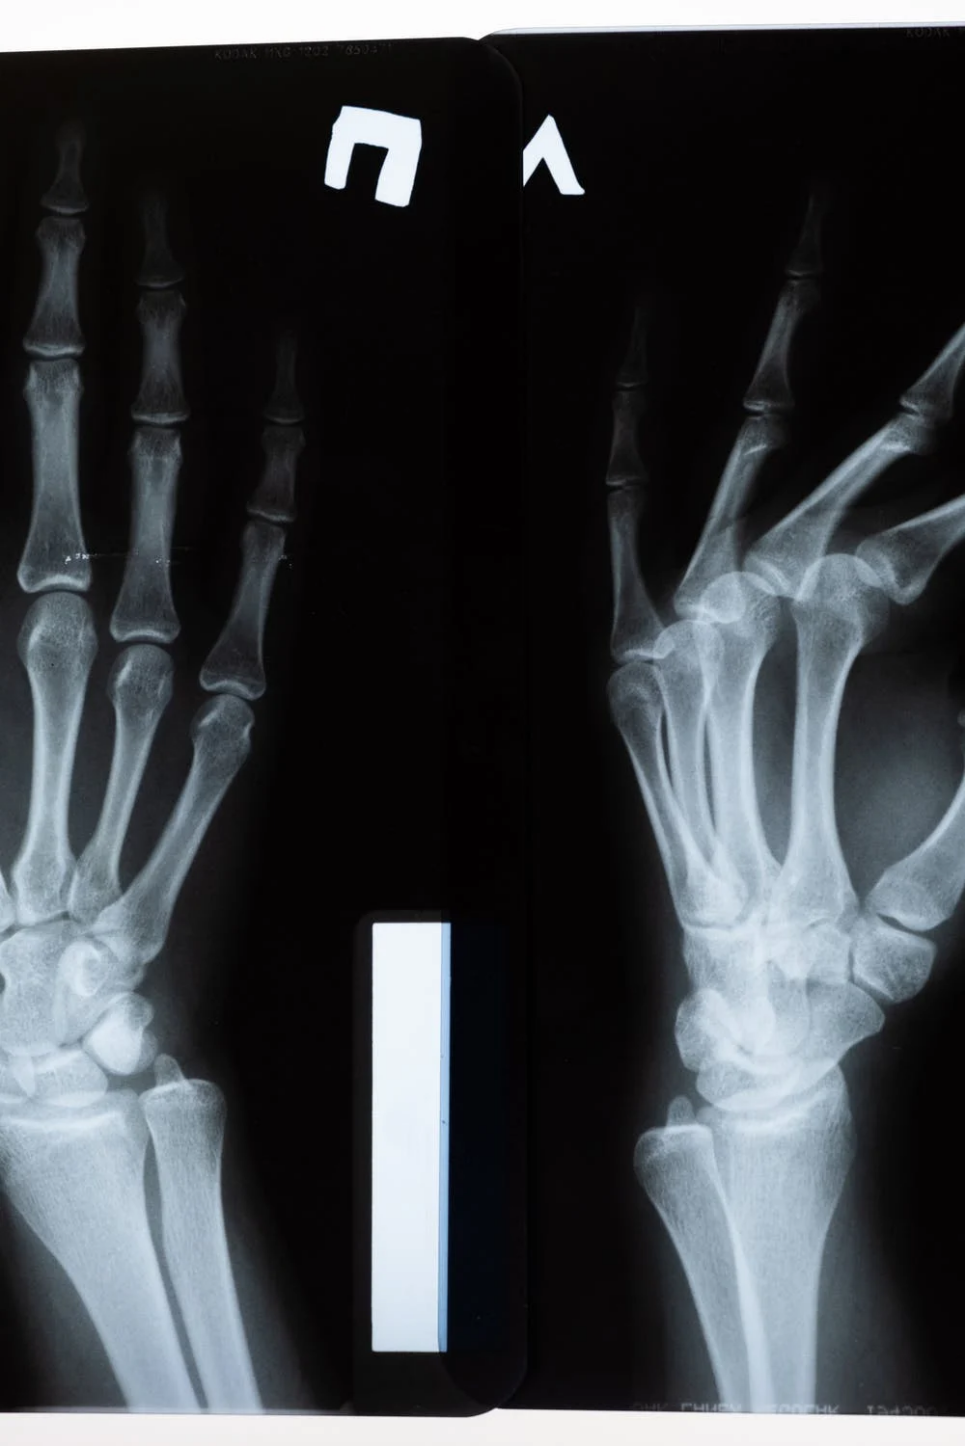 X-ray image of a person’s hands. 